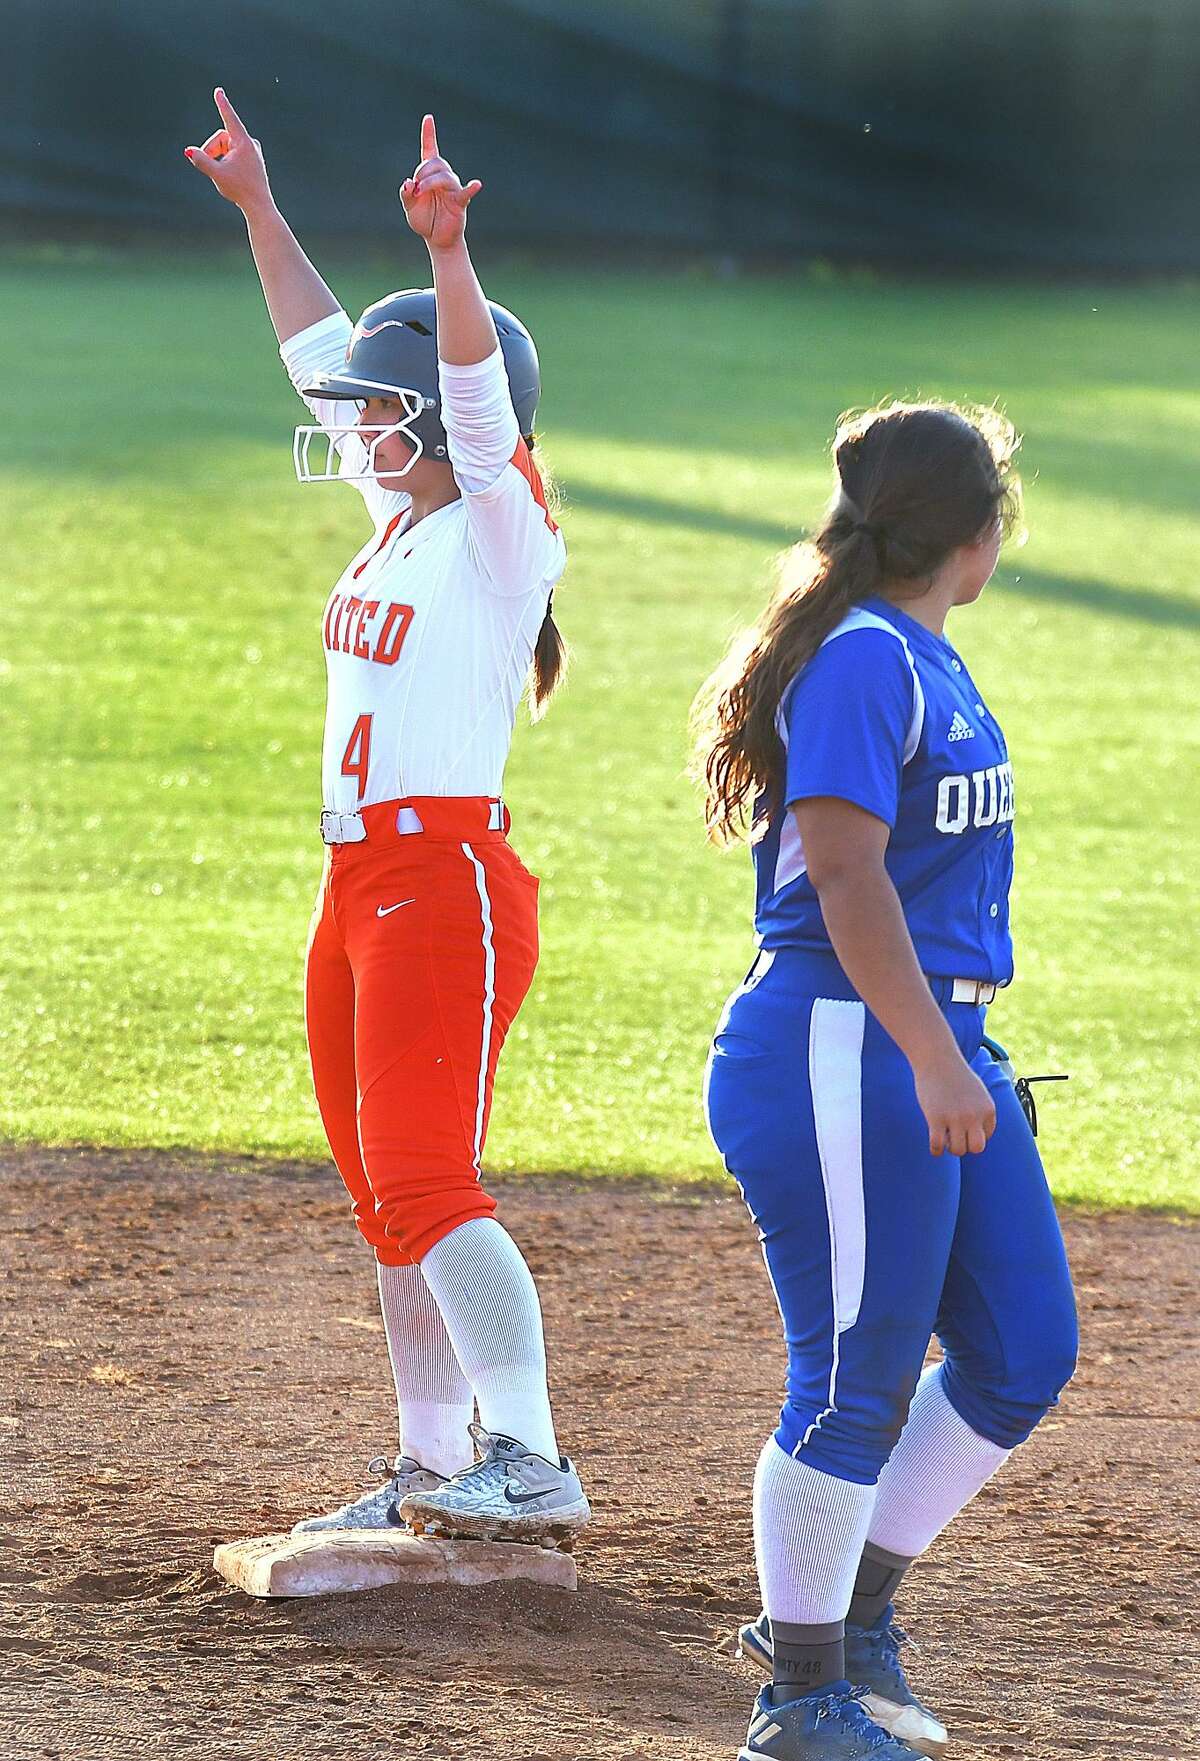 A grand slam Monday from Eva Garcia helped United secure the No. 2 seed in District 29-6A with a 16-9 win over Del Rio.